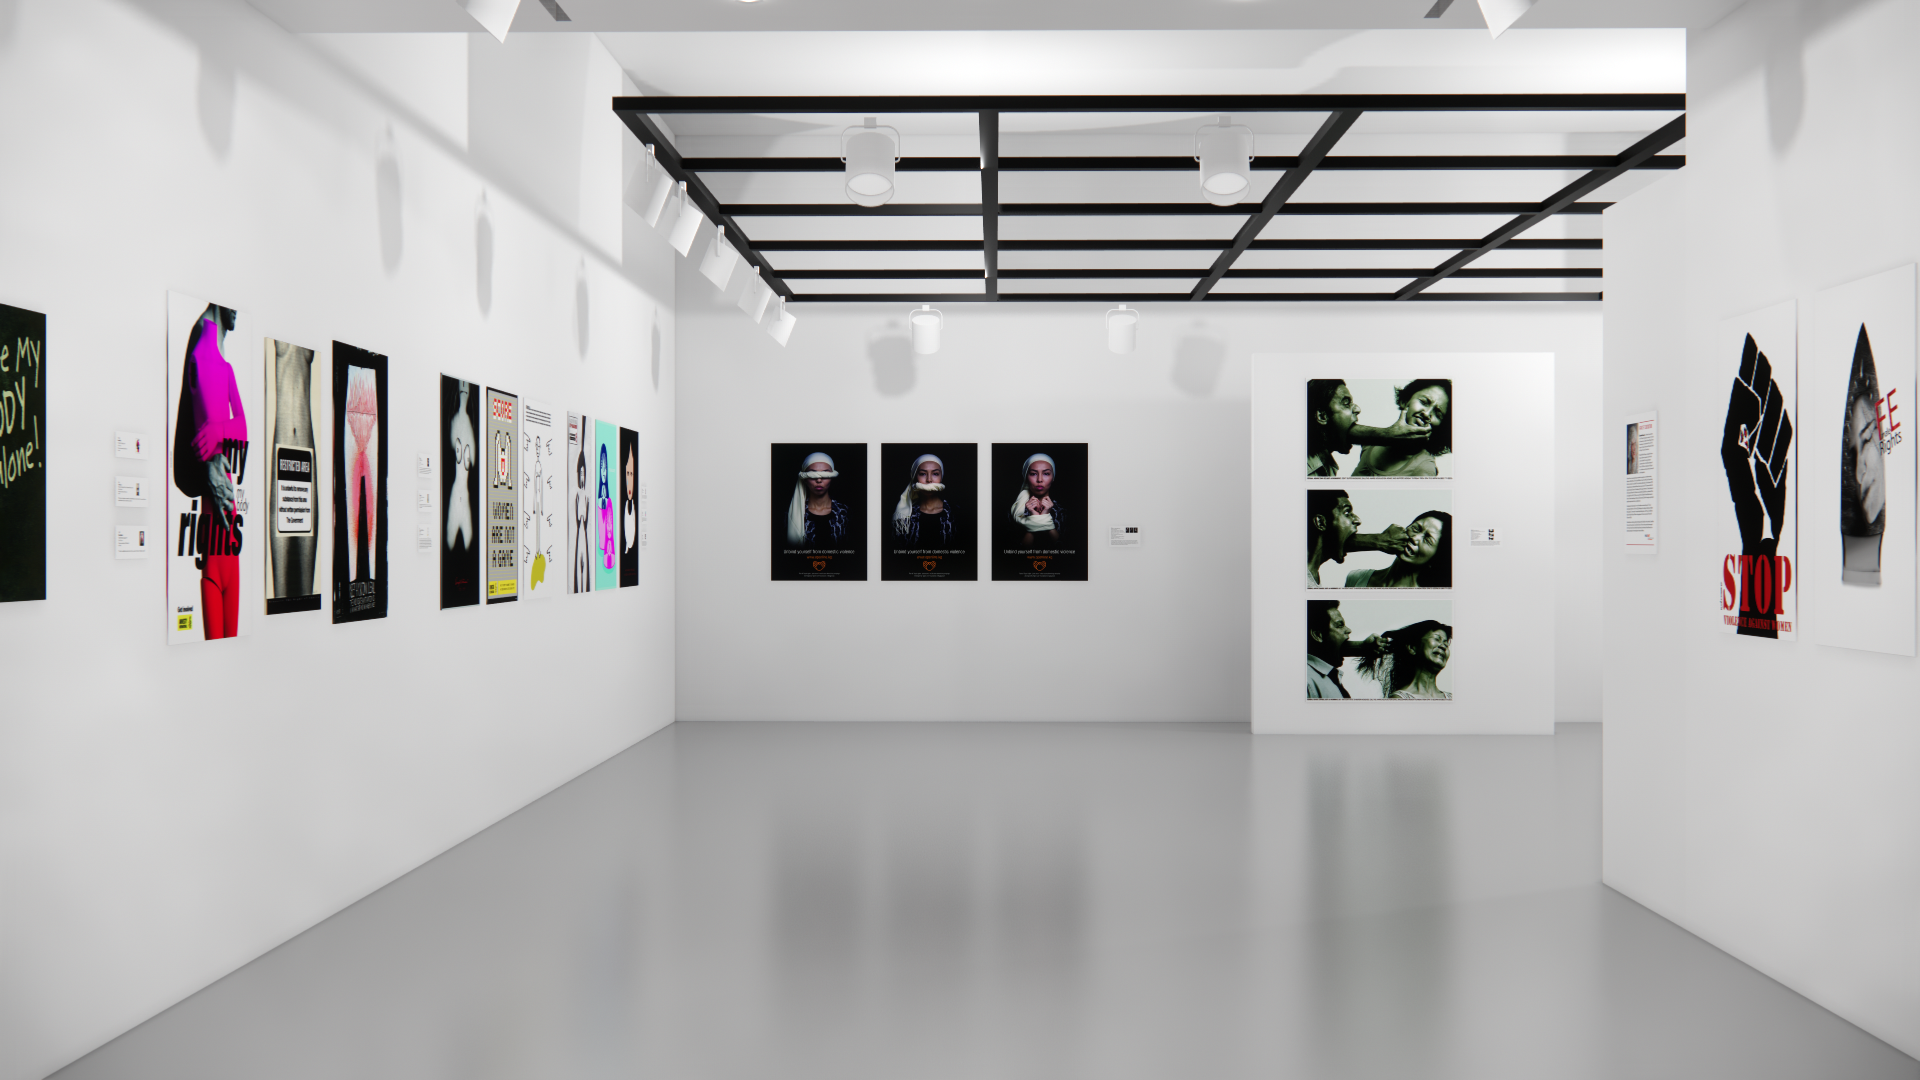 Installation View, Corridor of Gallery, Women's Rights are Human Rights Exhibition, Sept 15, 2021 to Dec 1, 2021